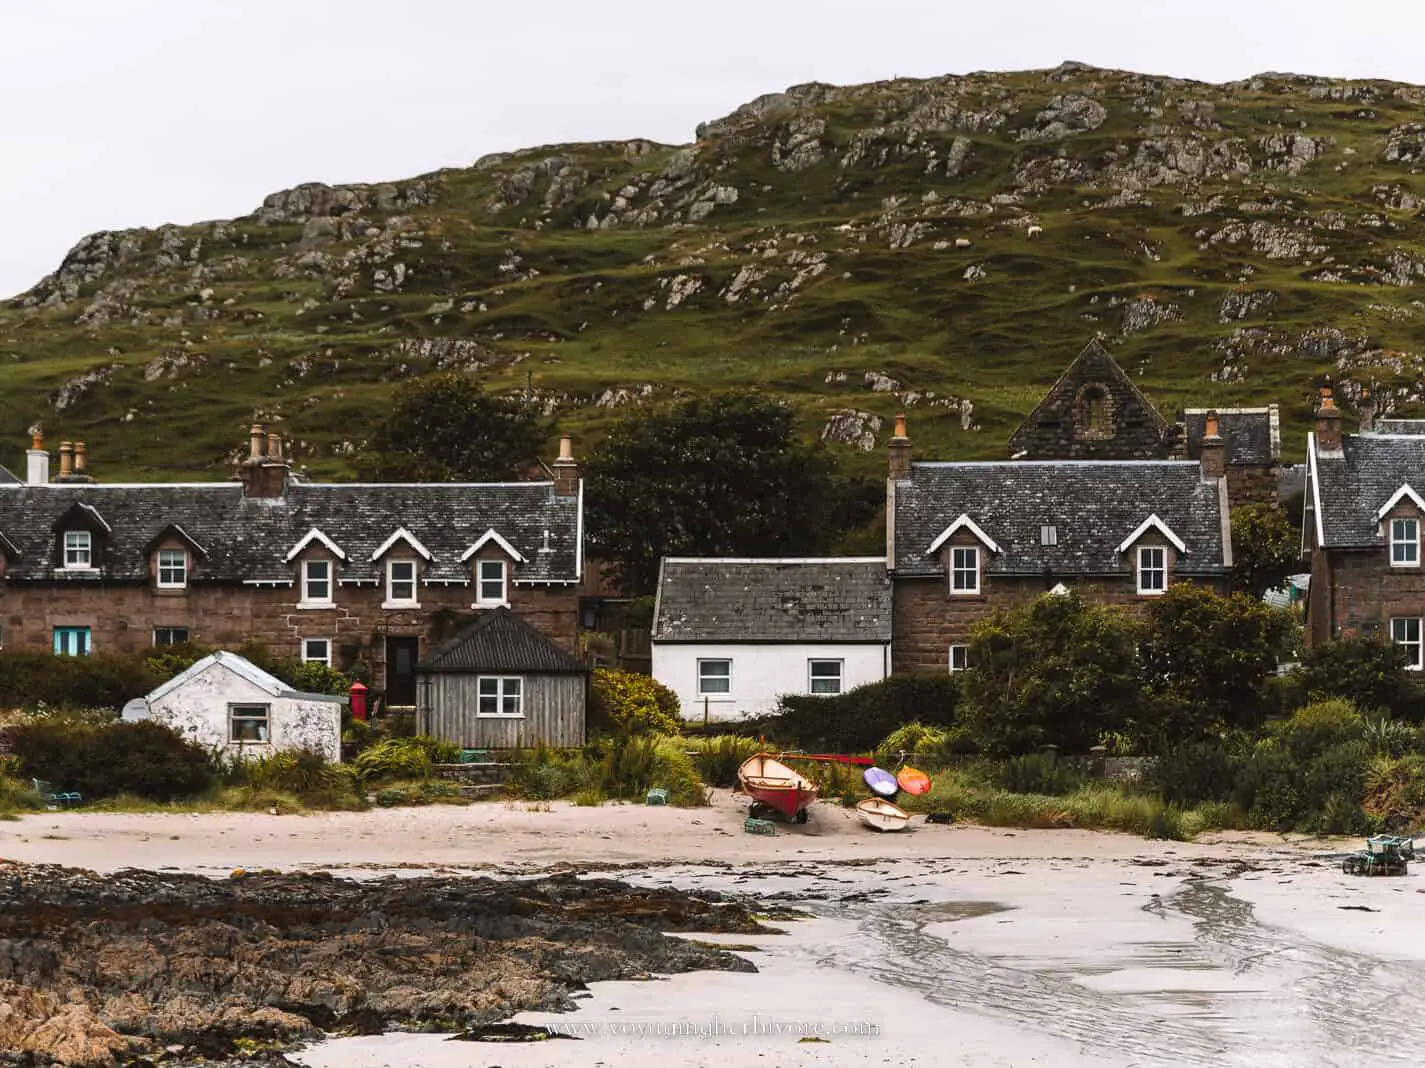 4 Sustainable Items To Pack For Your Next Outdoor Holiday in Scotland